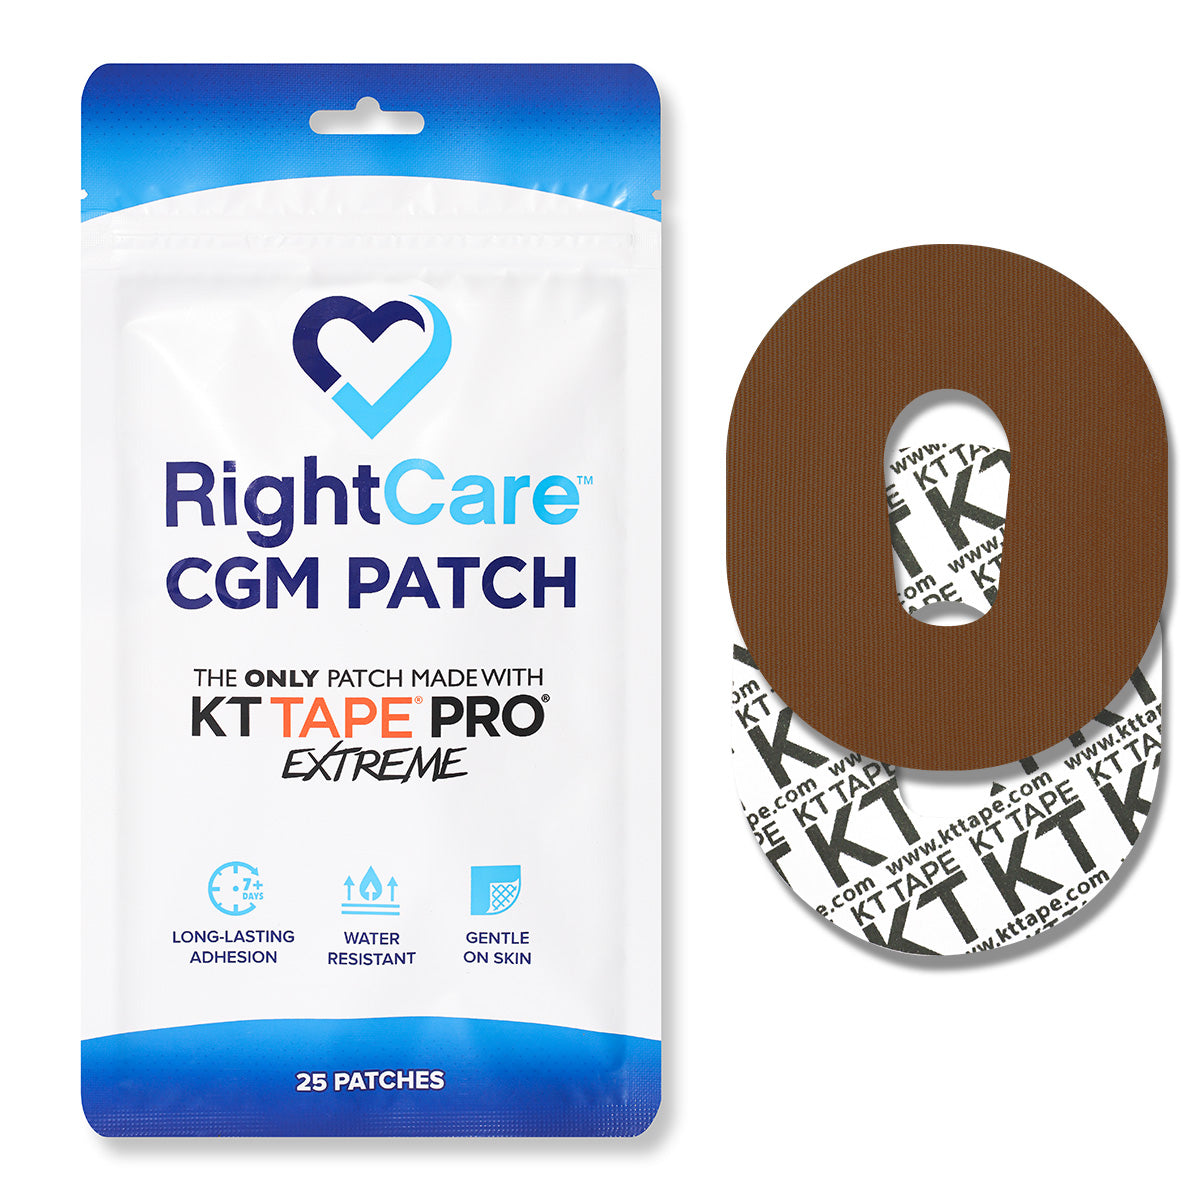 RightCare CGM Adhesive Patch made with KT Tape, Dexcom, Bag of 25 30261813